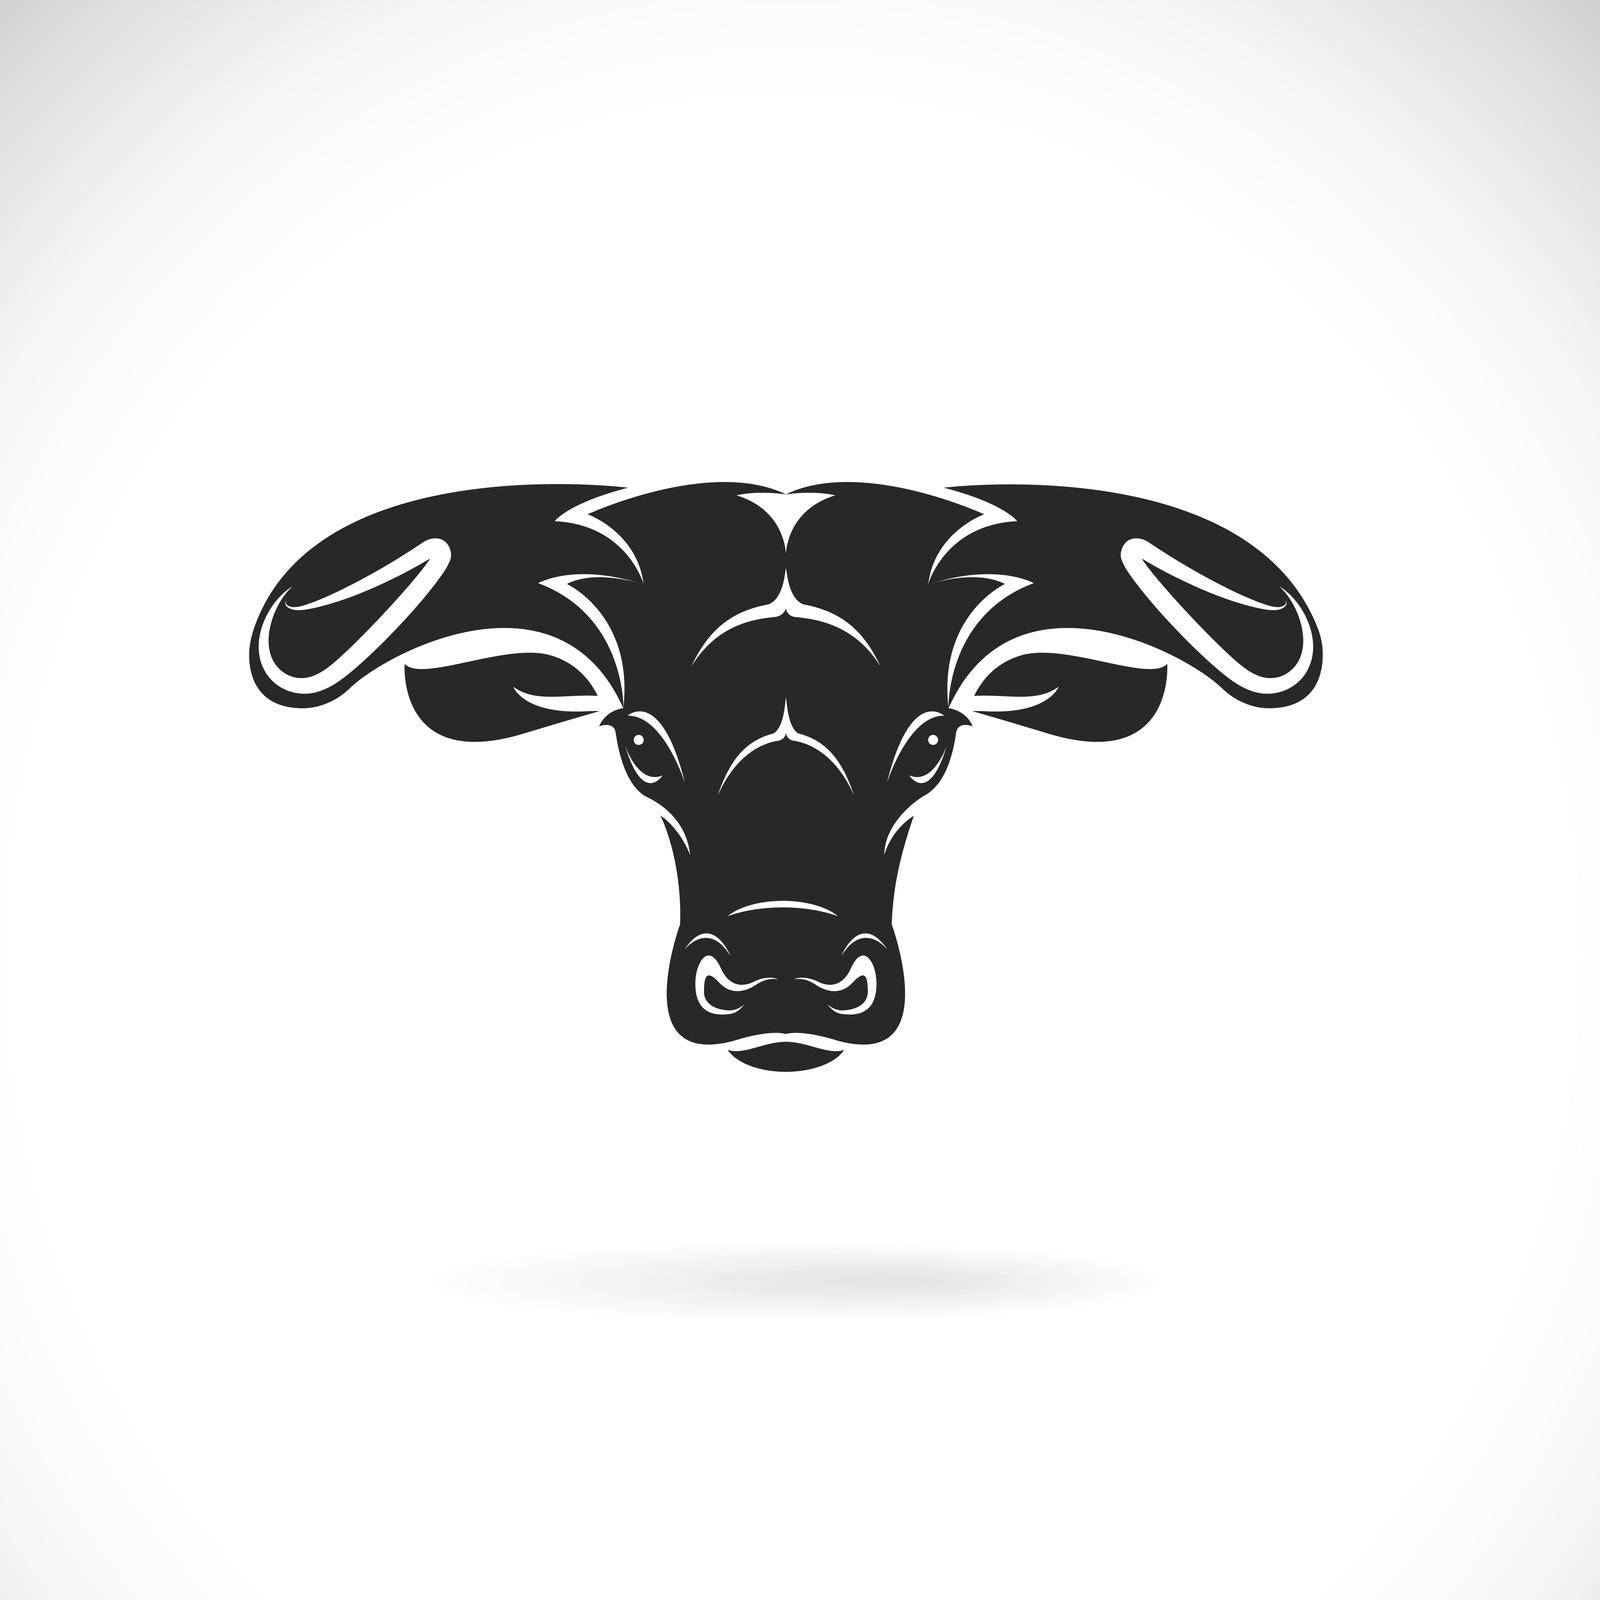 Vector of bull head design on white background., Wild Animals. Easy editable layered vector illustration. by yod67